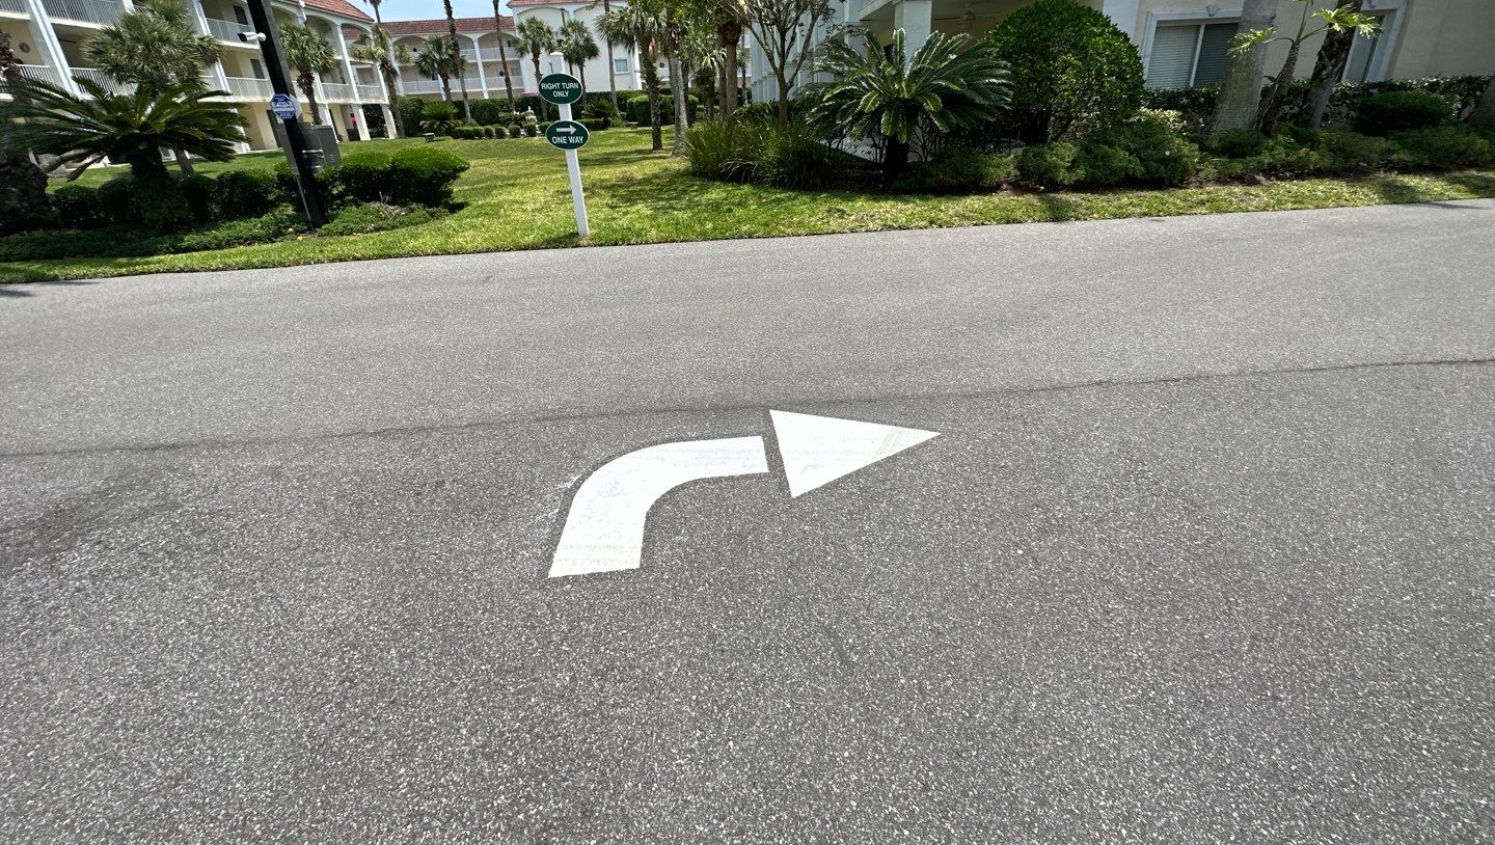 a curved arrow painted on the street